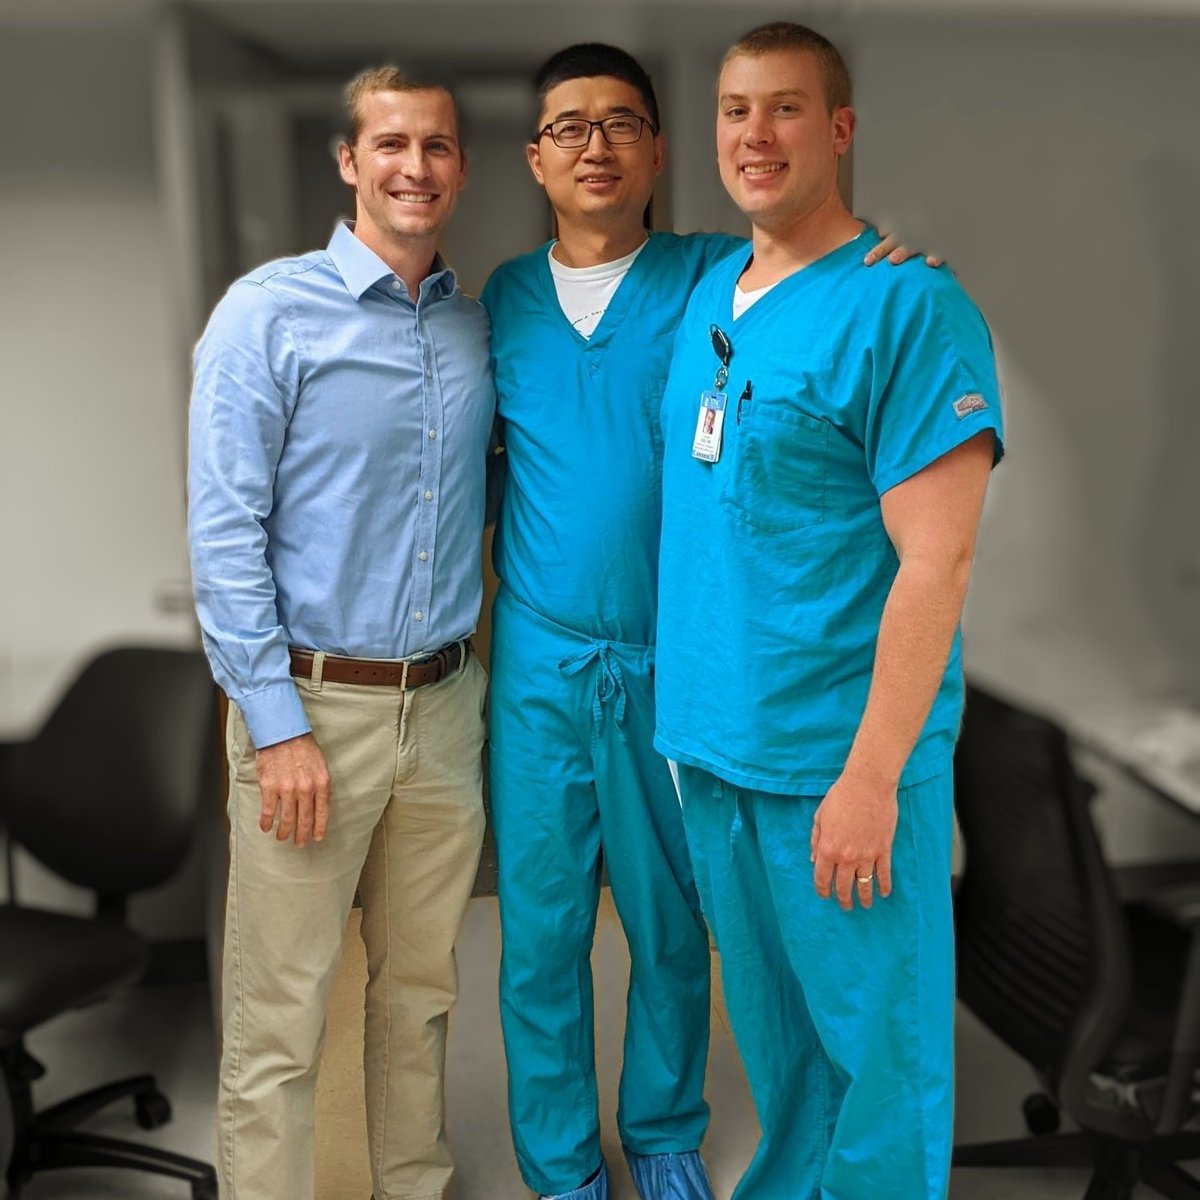 Congratulations to Card fellows Grayson Eubanks, Chadd Lee, and JD Zhang, who defeated Wake Forest, MUSC, and Prisma at the NC/SC ACC meeting in Sept. at FIT Jeopardy! They will advance to the National Competition at New Orleans #acc23. @UNC_SOM @UNCDeptMedicine @UNC_Health_Care